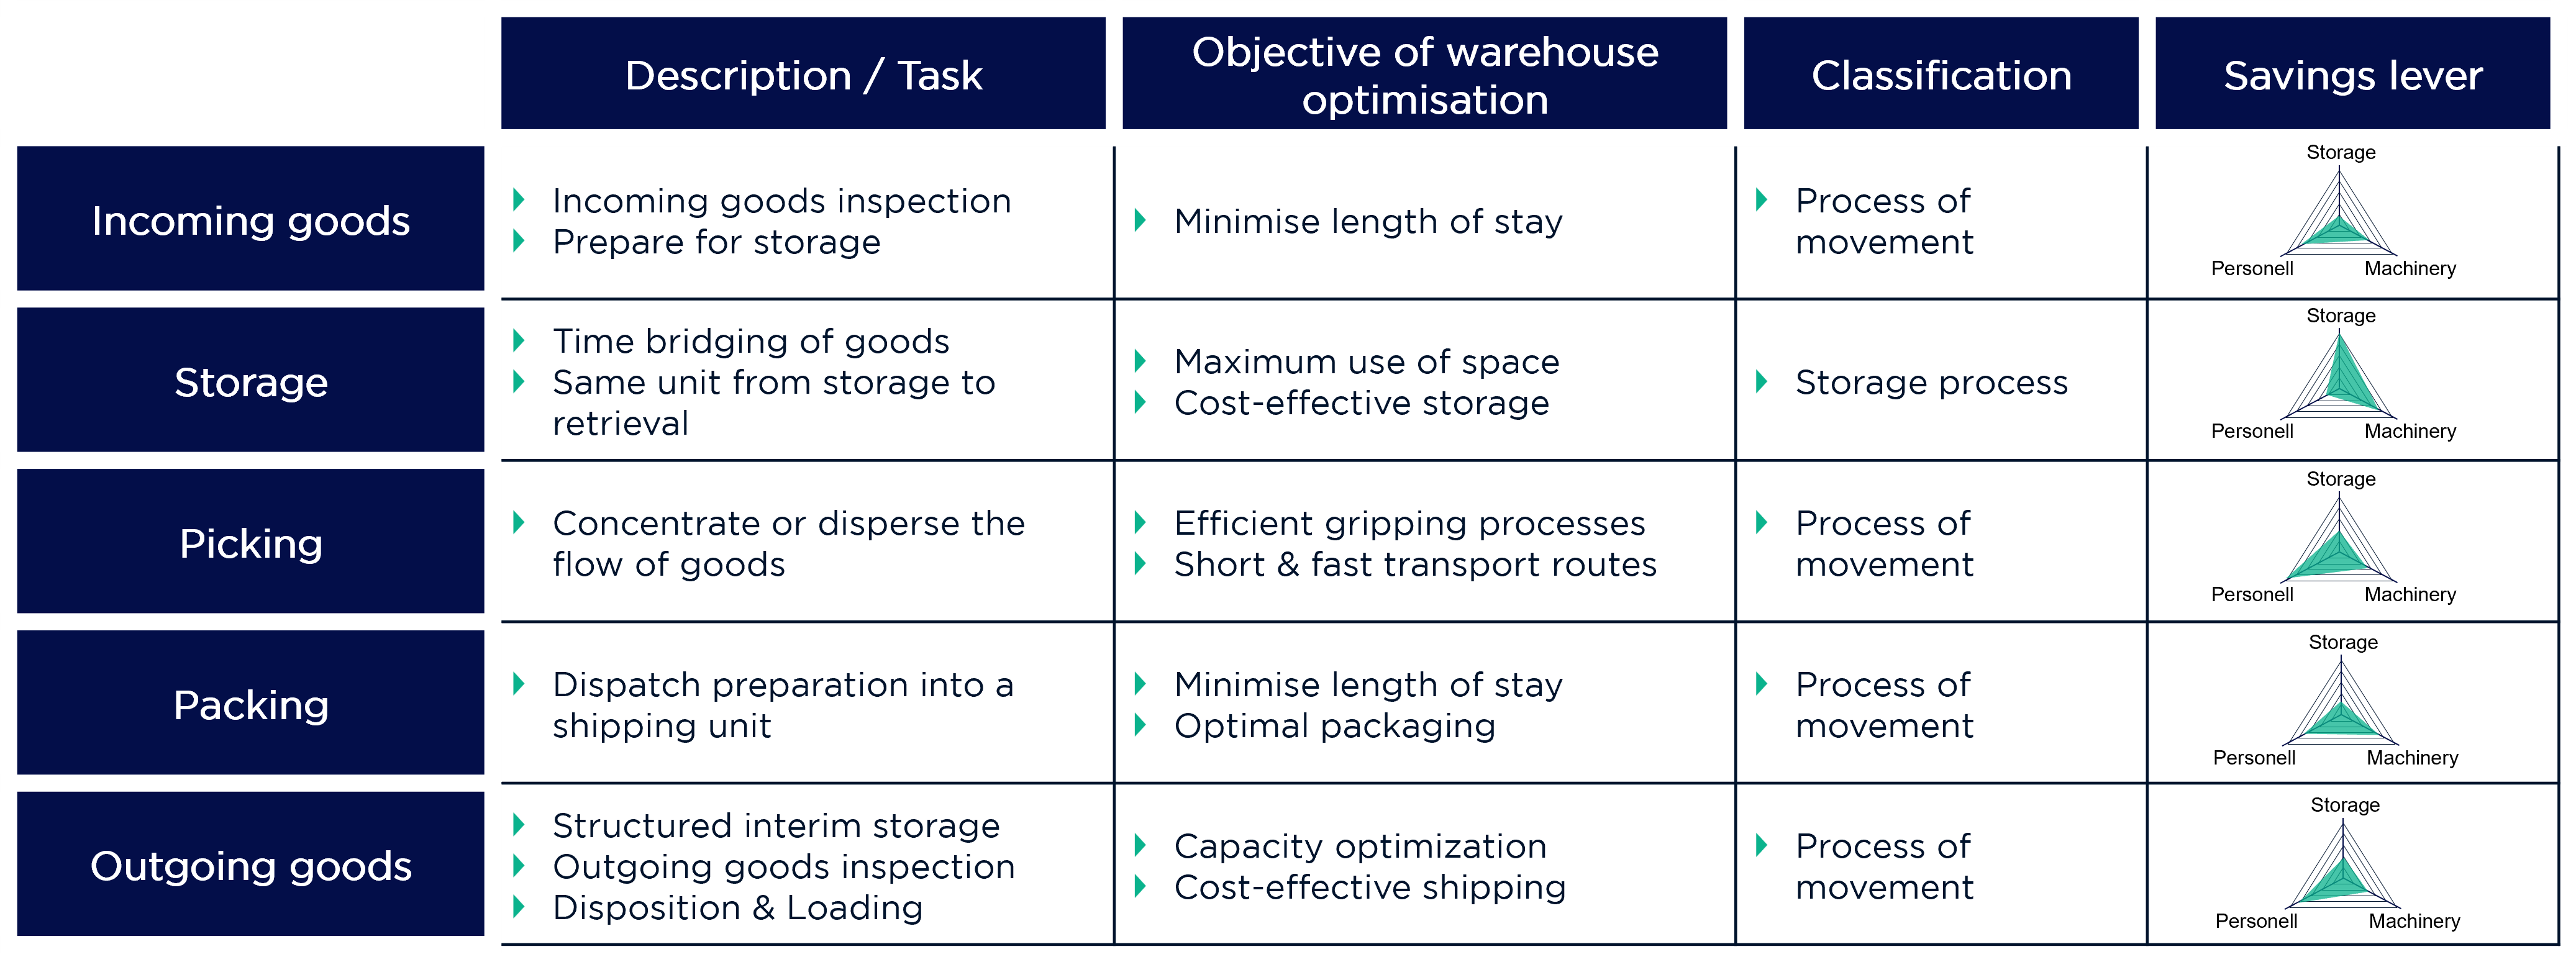 Tasks and optimization targets of the warehouse areas